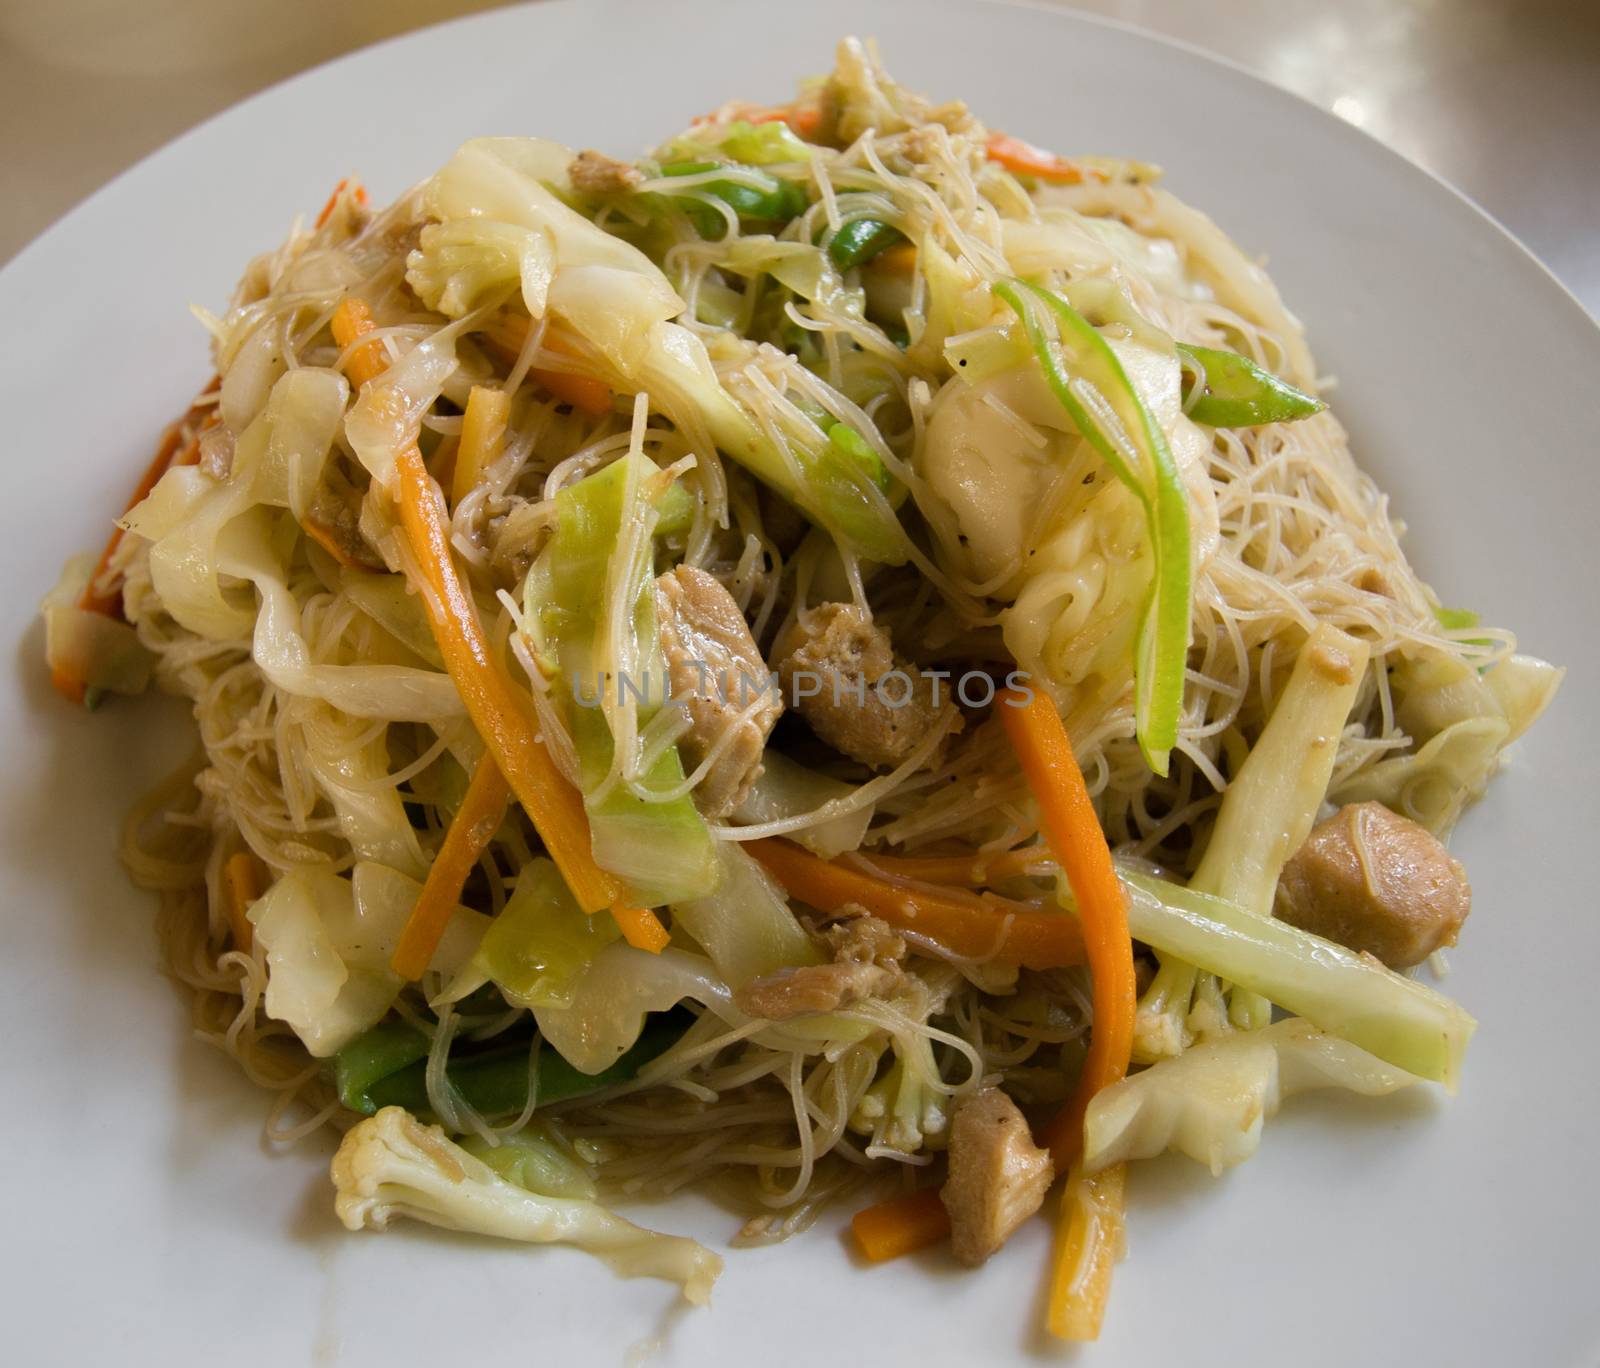 COLOR PHOTO OF STIR FRIED RICE VERMICELLI WITH VEGETABLES